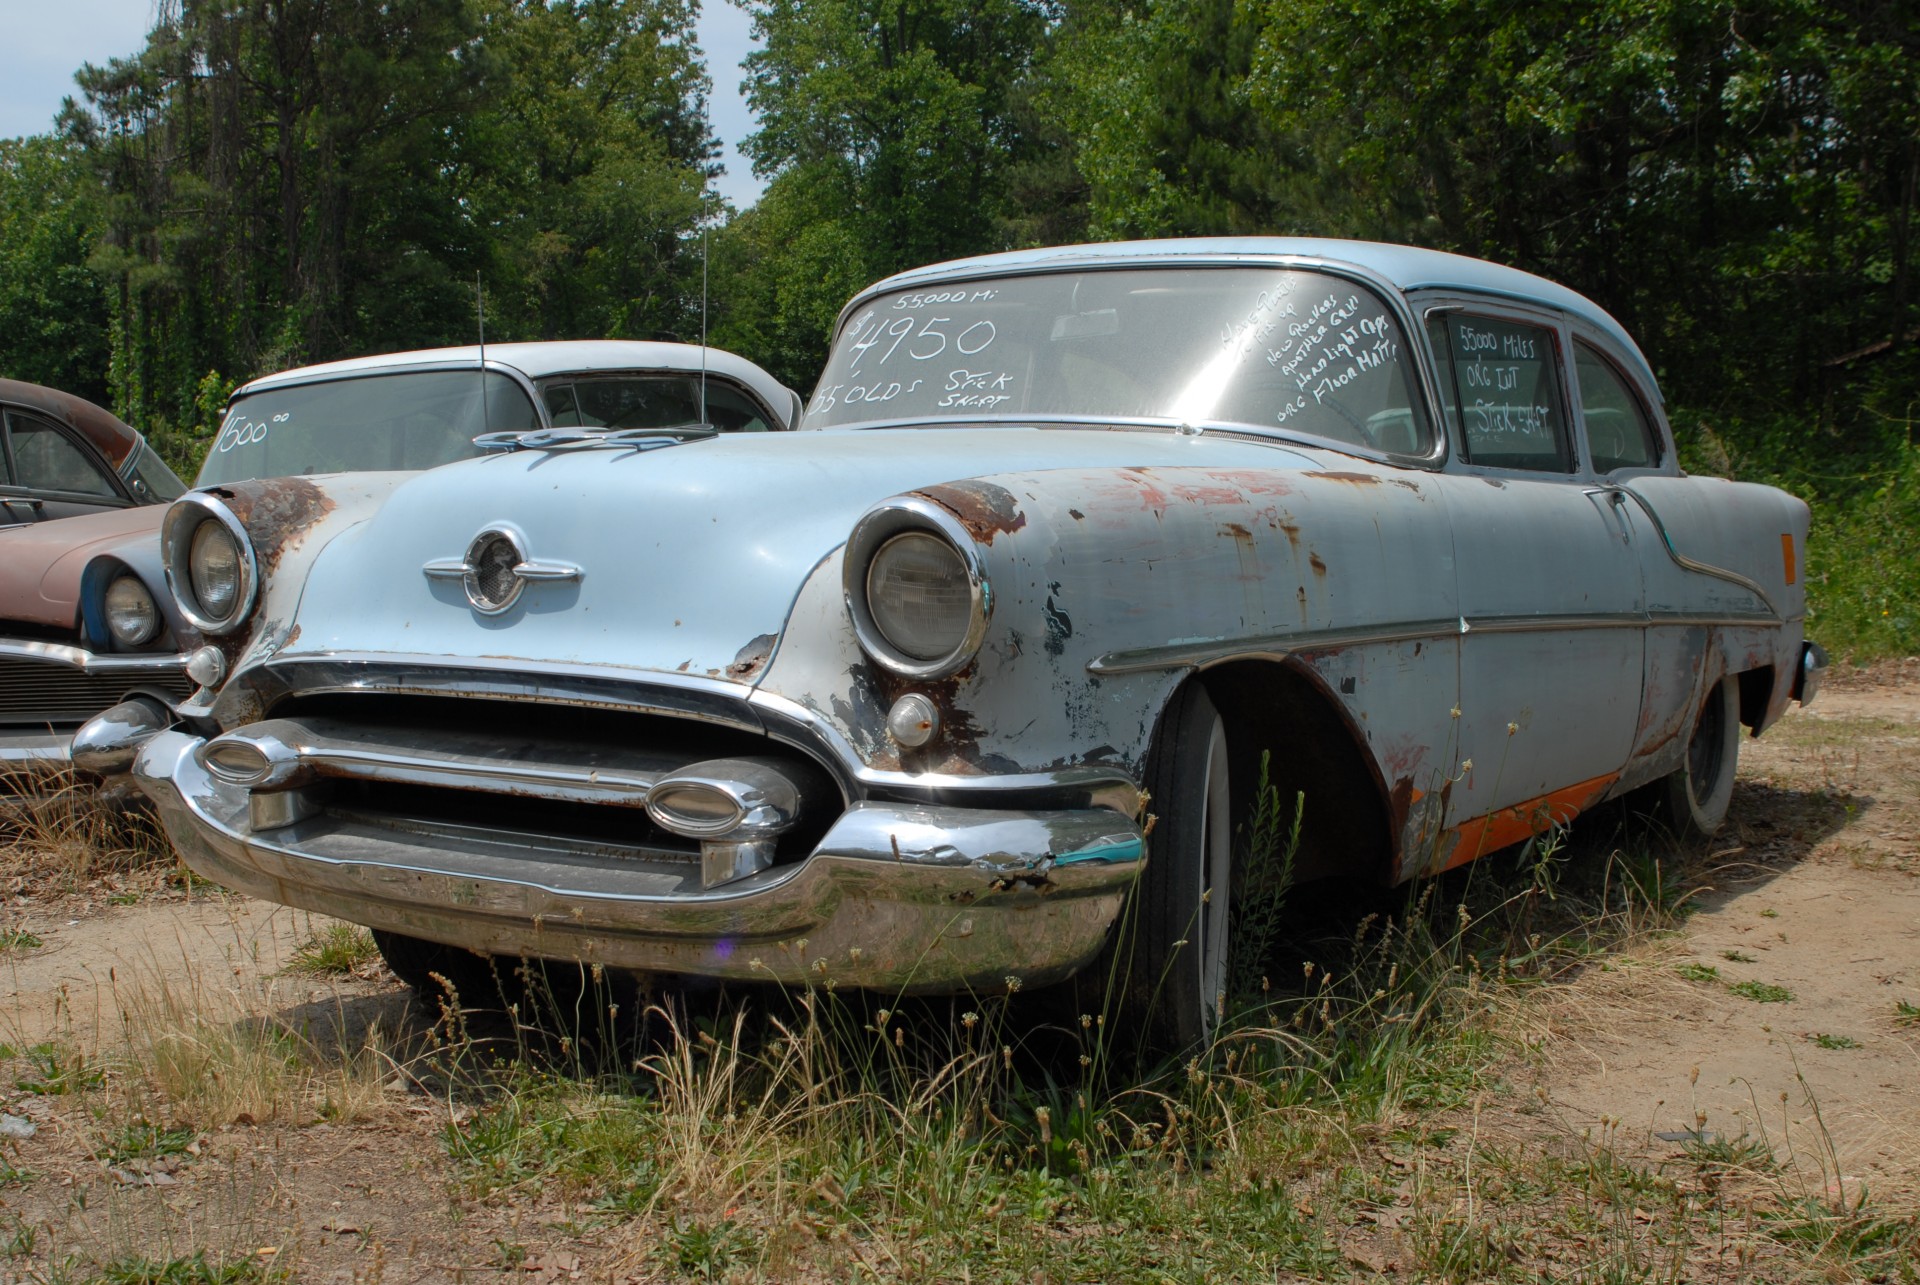 Old junked car for sale at rural Georgia, USA